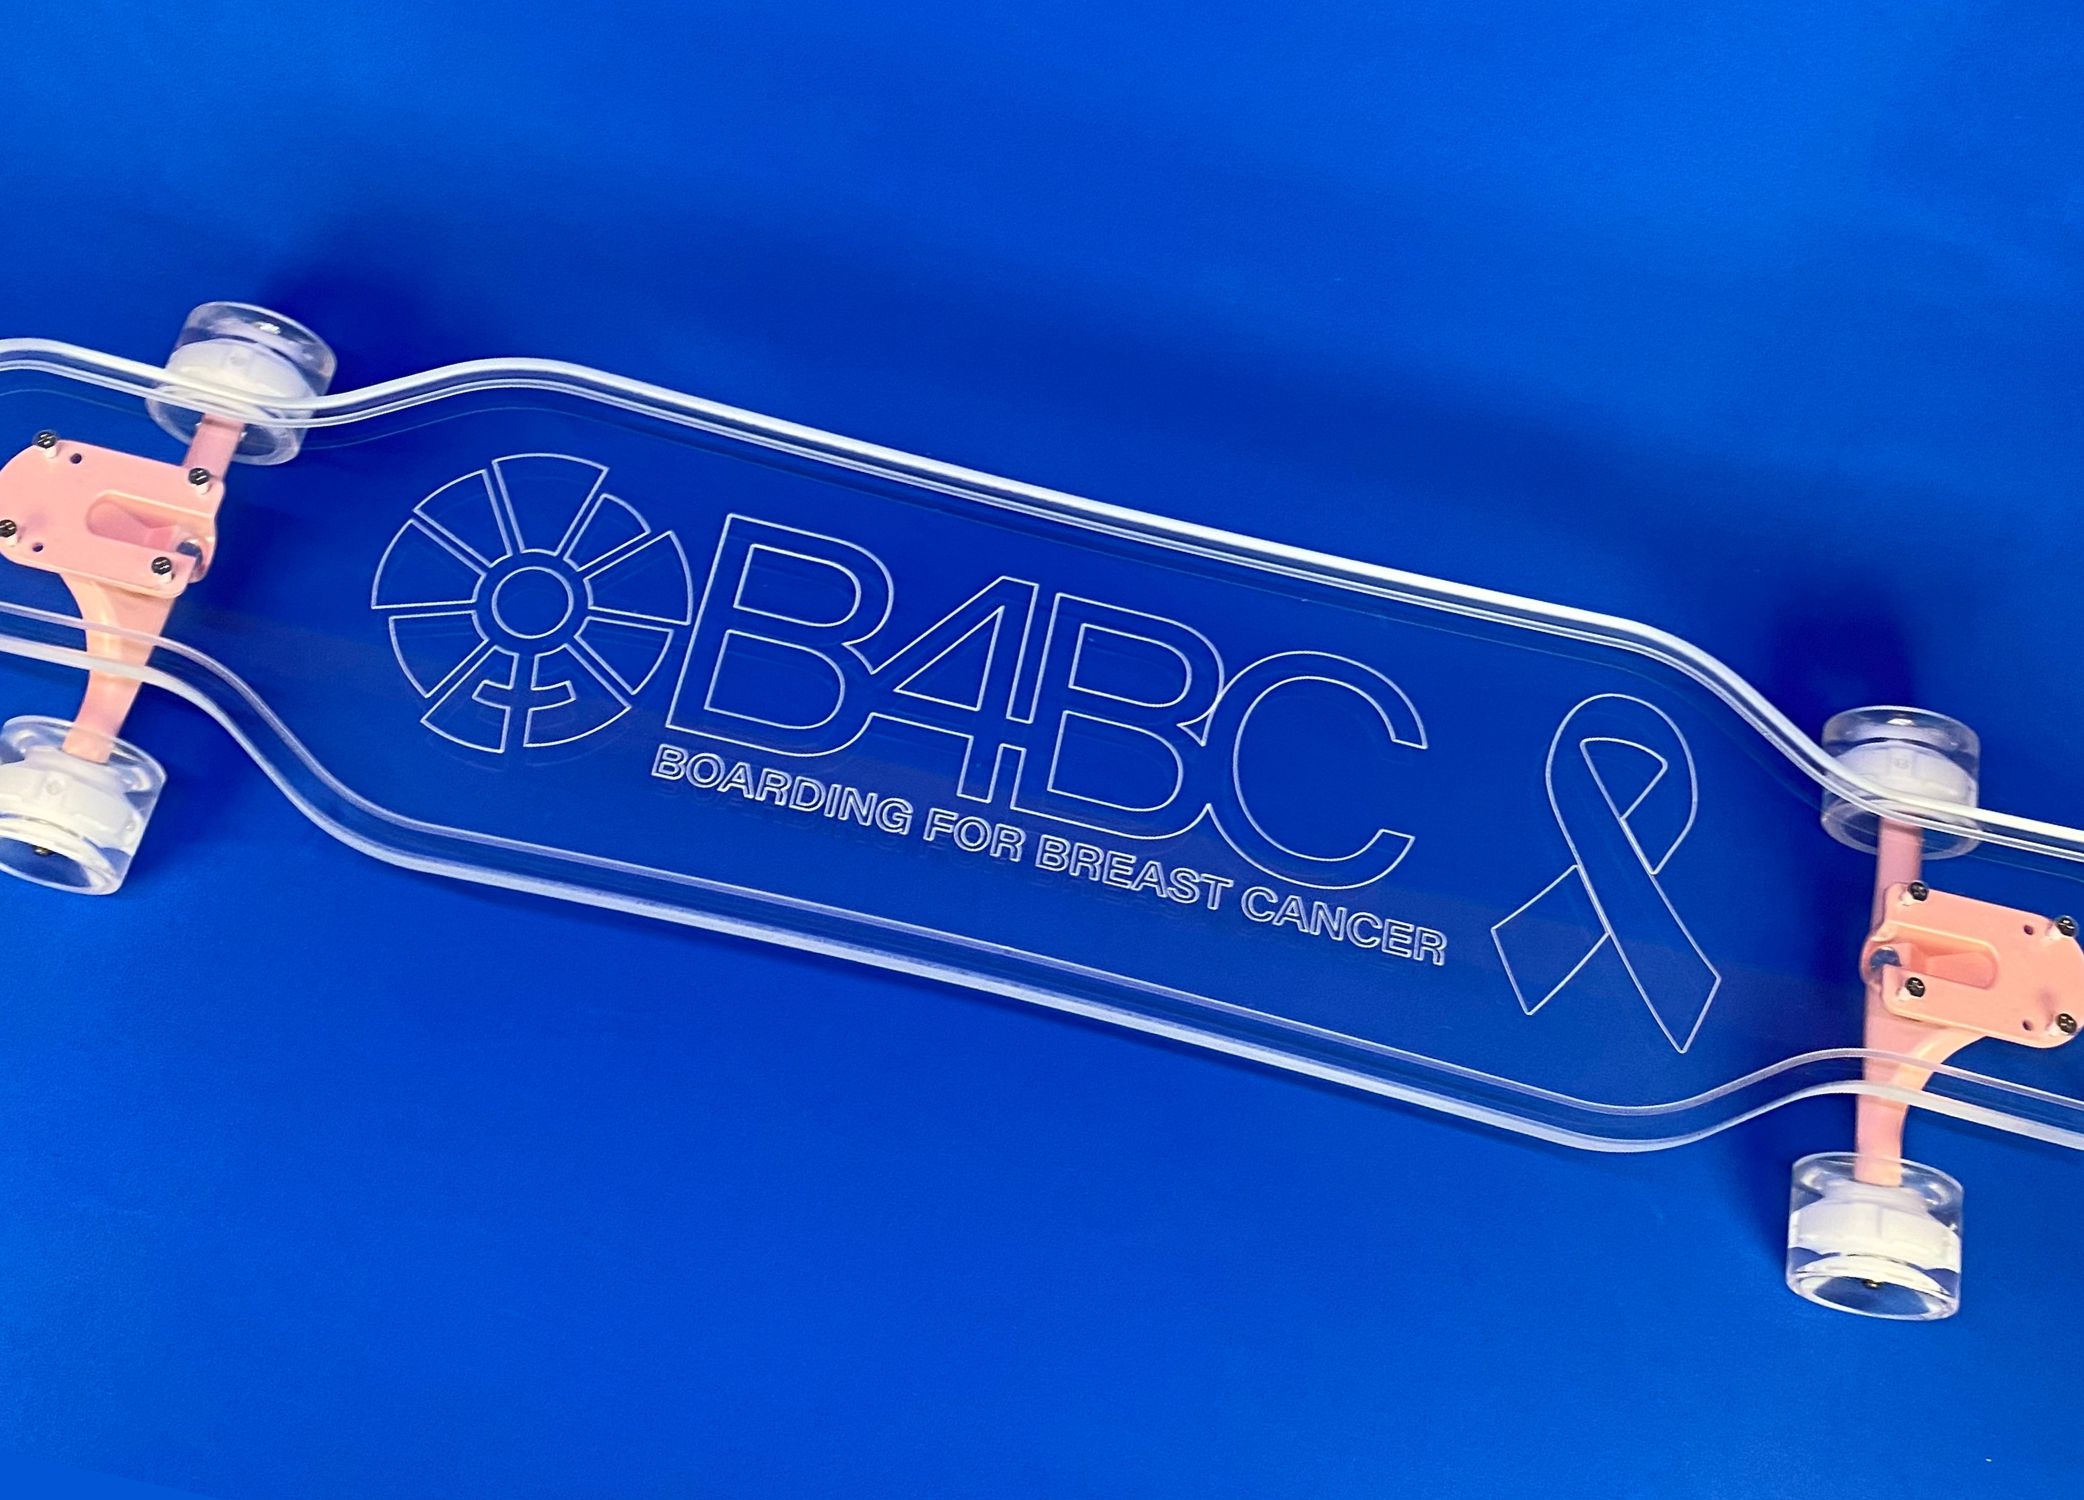 Clear B4BC longboard that has the non-profit organizations logo on it.